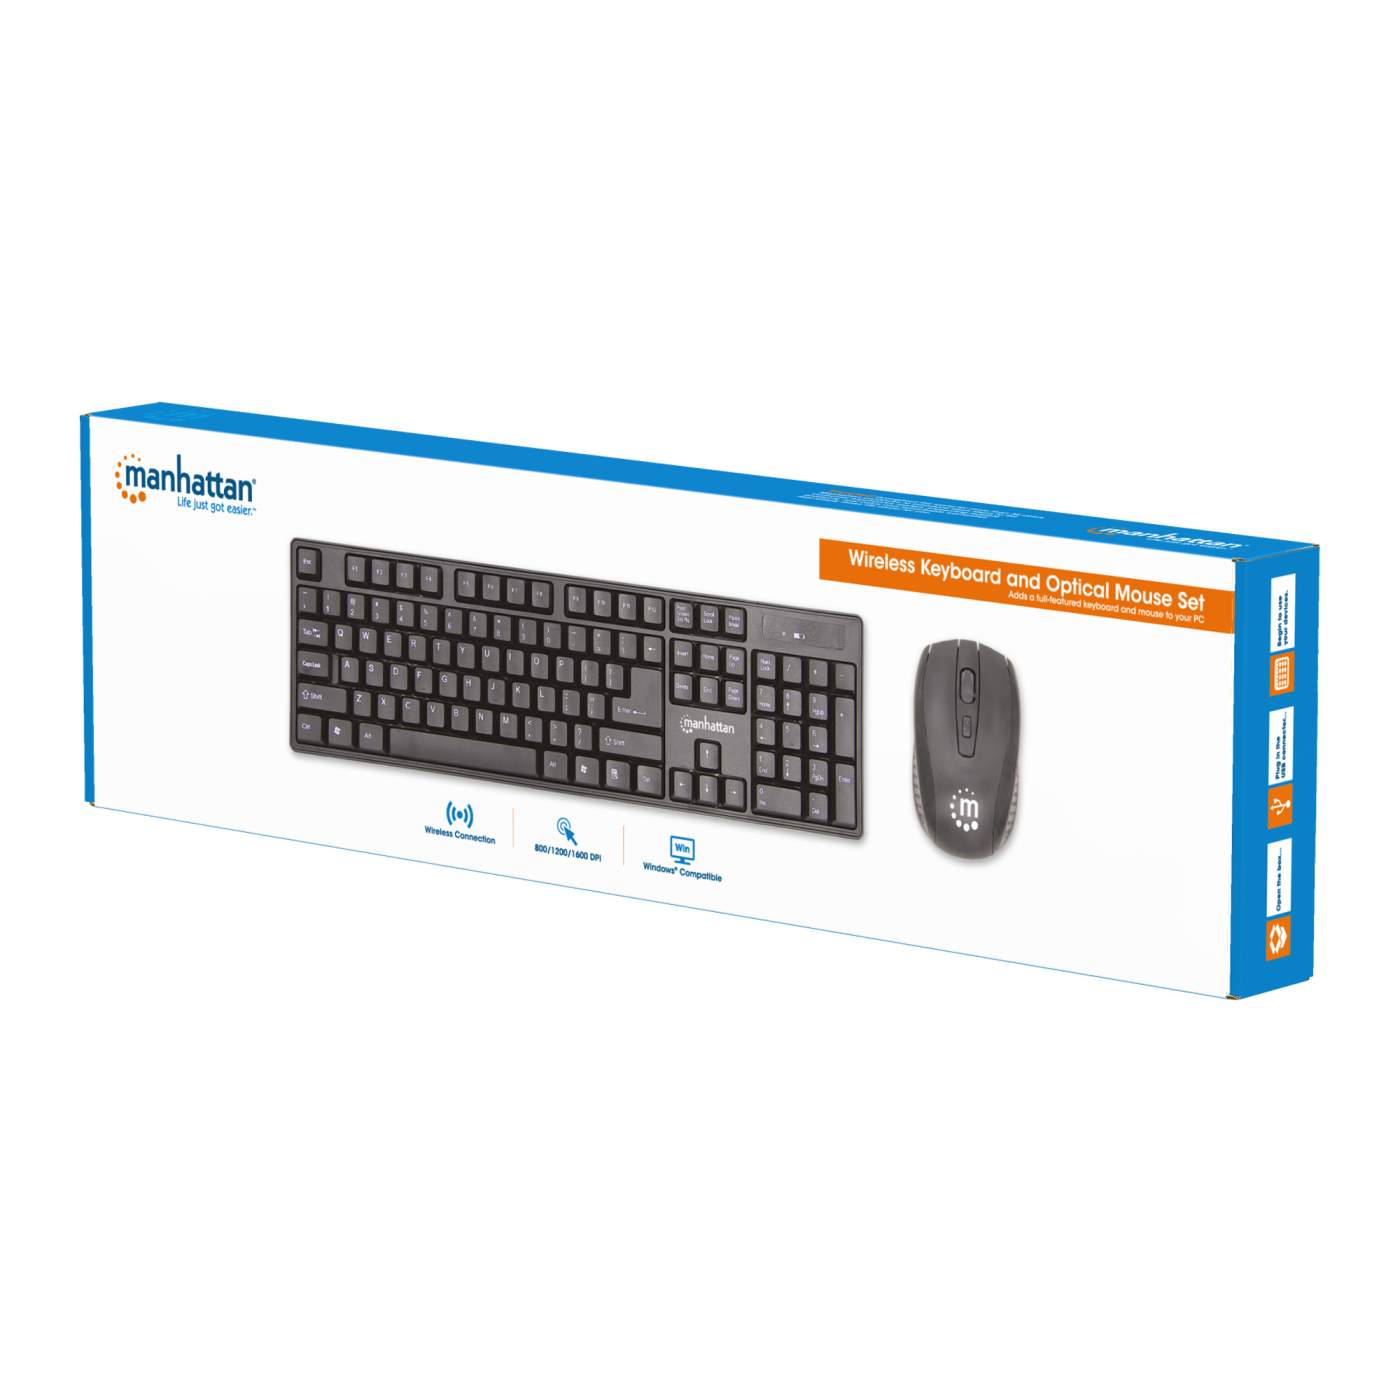 Wireless Keyboard and Optical Mouse Set Packaging Image 2